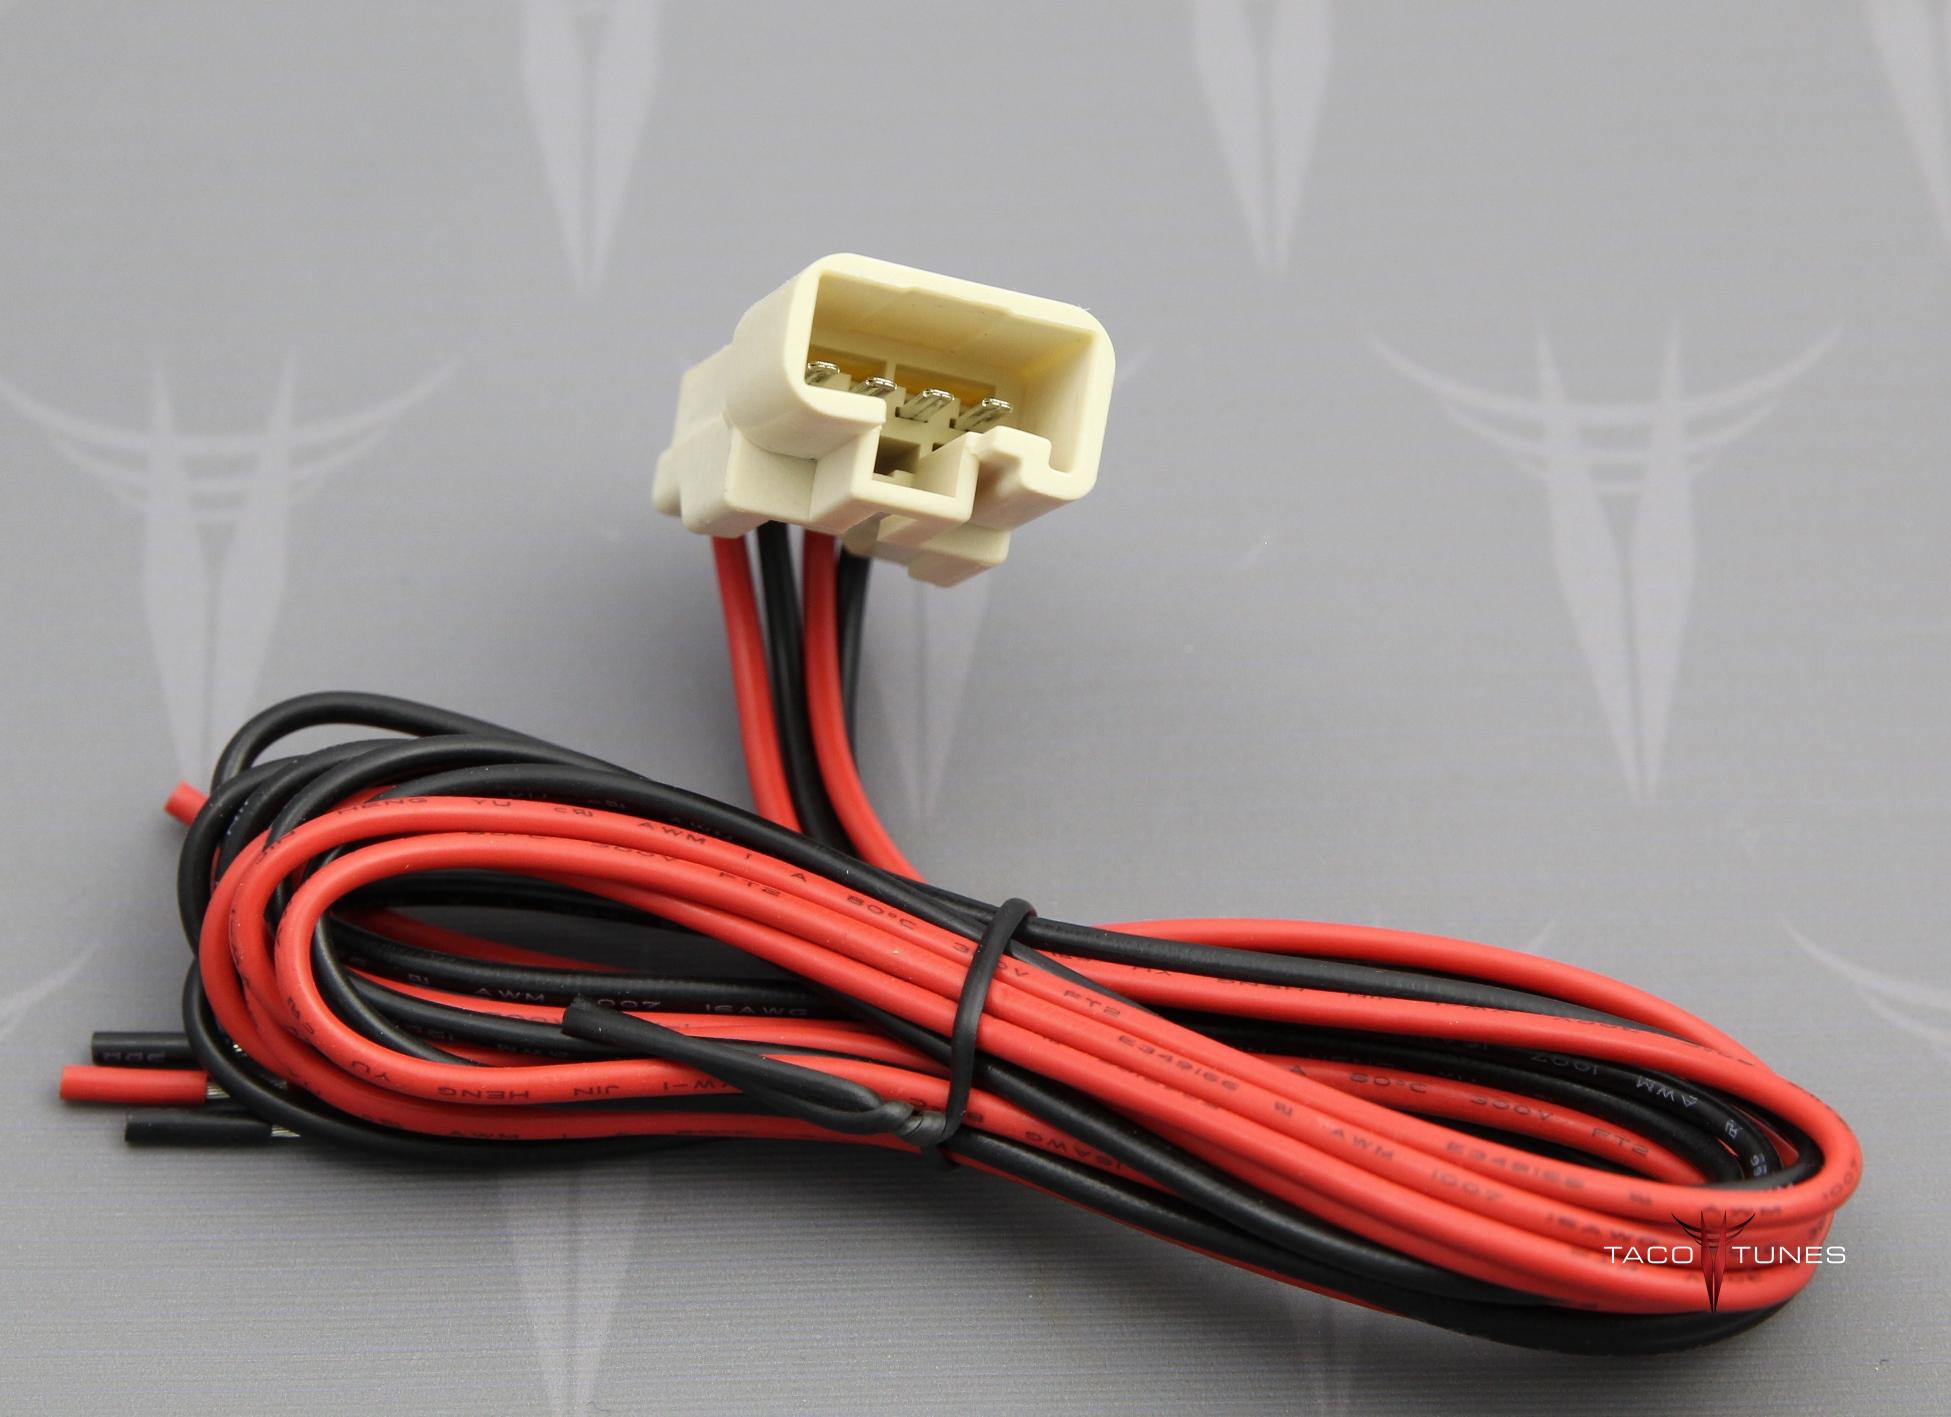 Wiring Harness Adapter Toyota from tacotunes.com